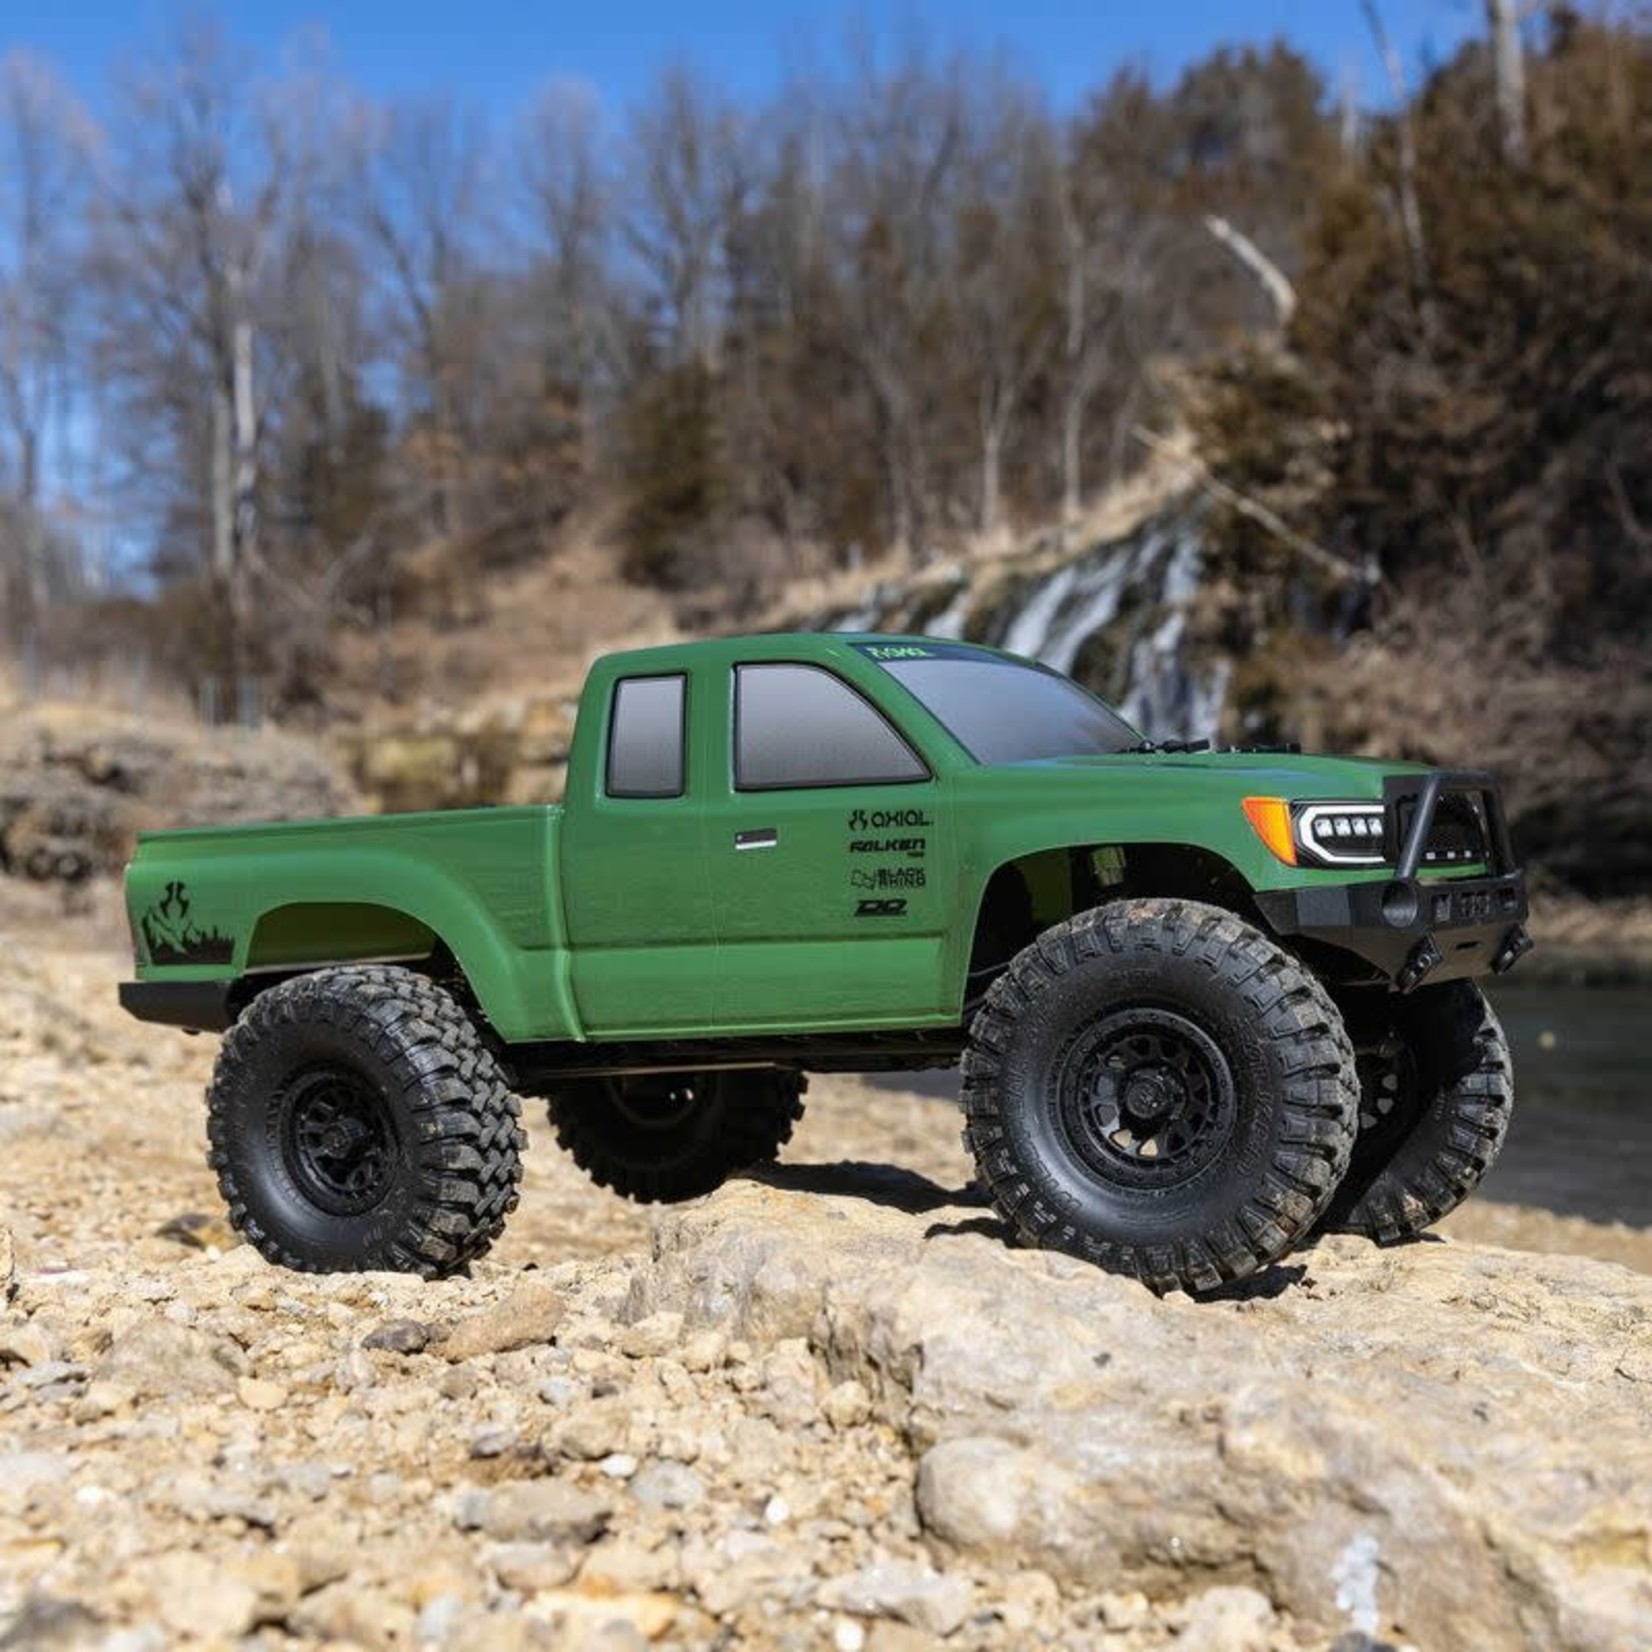 AXIAL SCX10 III Base Camp 1/10th 4WD RTR Green